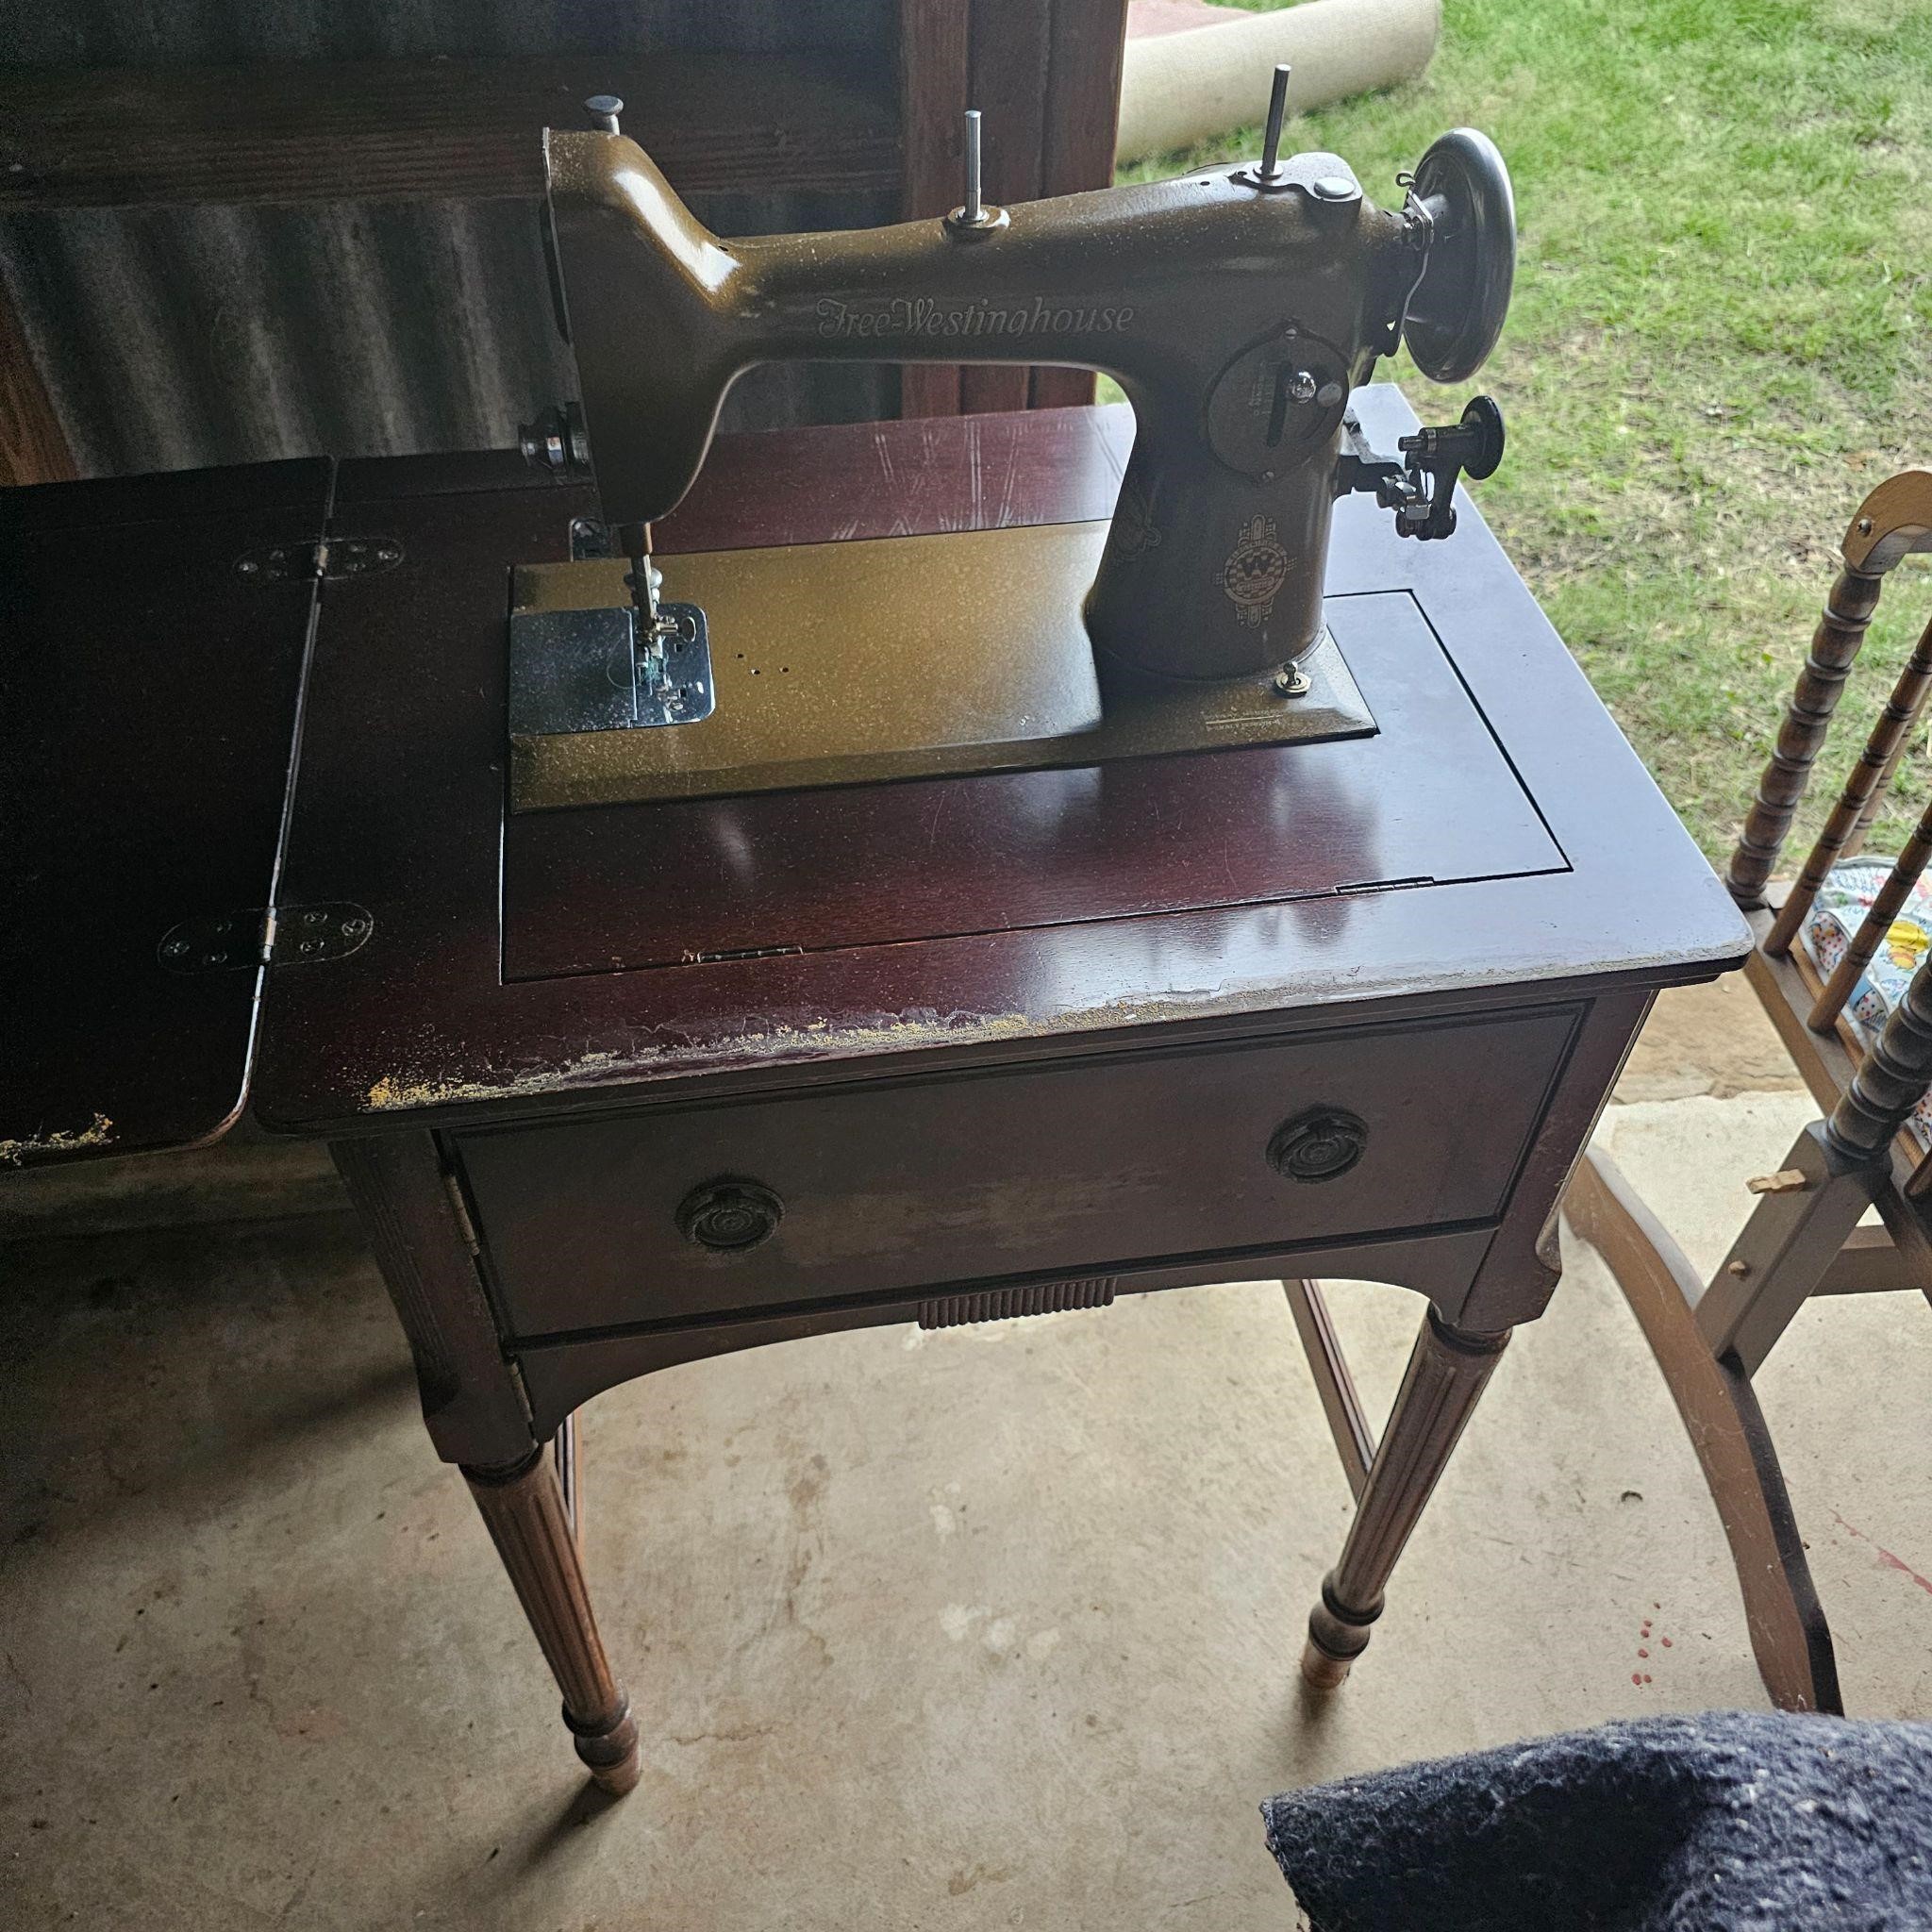 Free-Westinghouse Sewing Magine